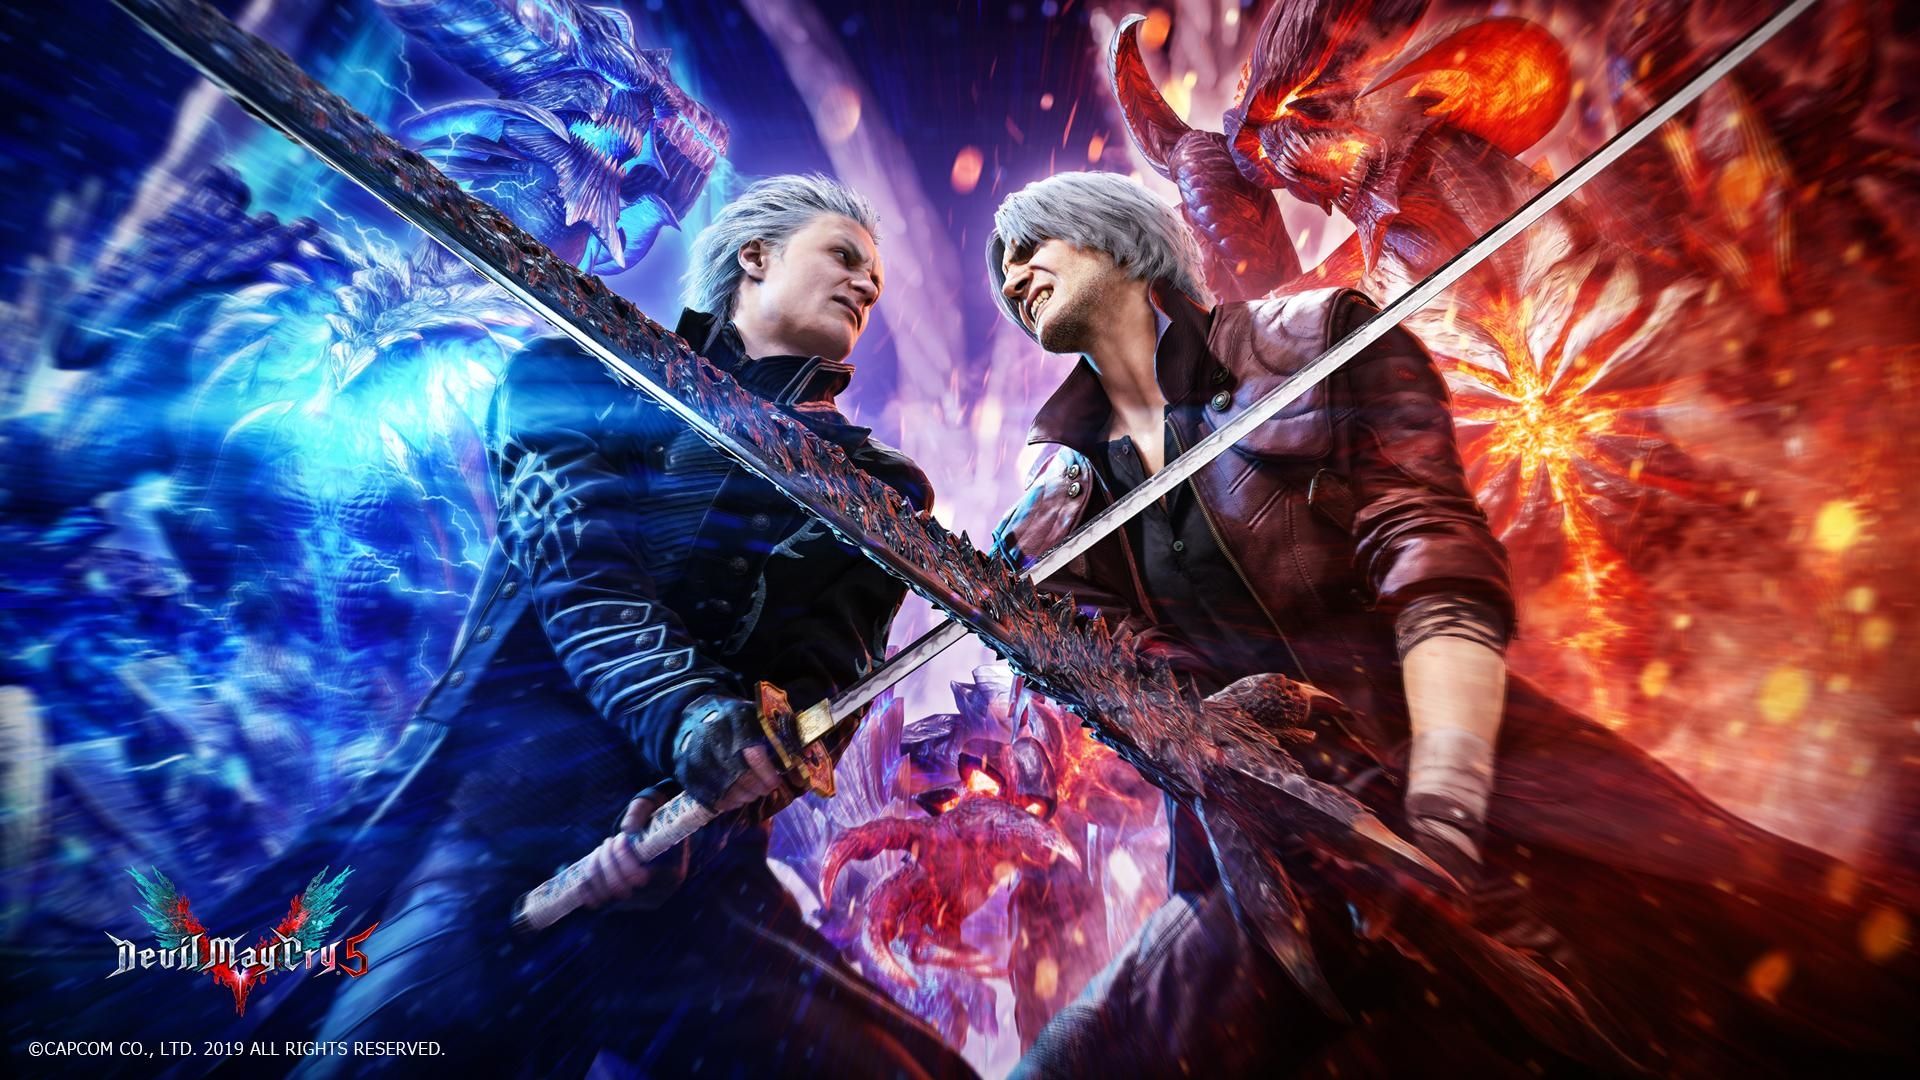 Dante vs Vergil Devil May Cry Wallpaper, HD Games 4K Wallpaper, Image, Photo and Background